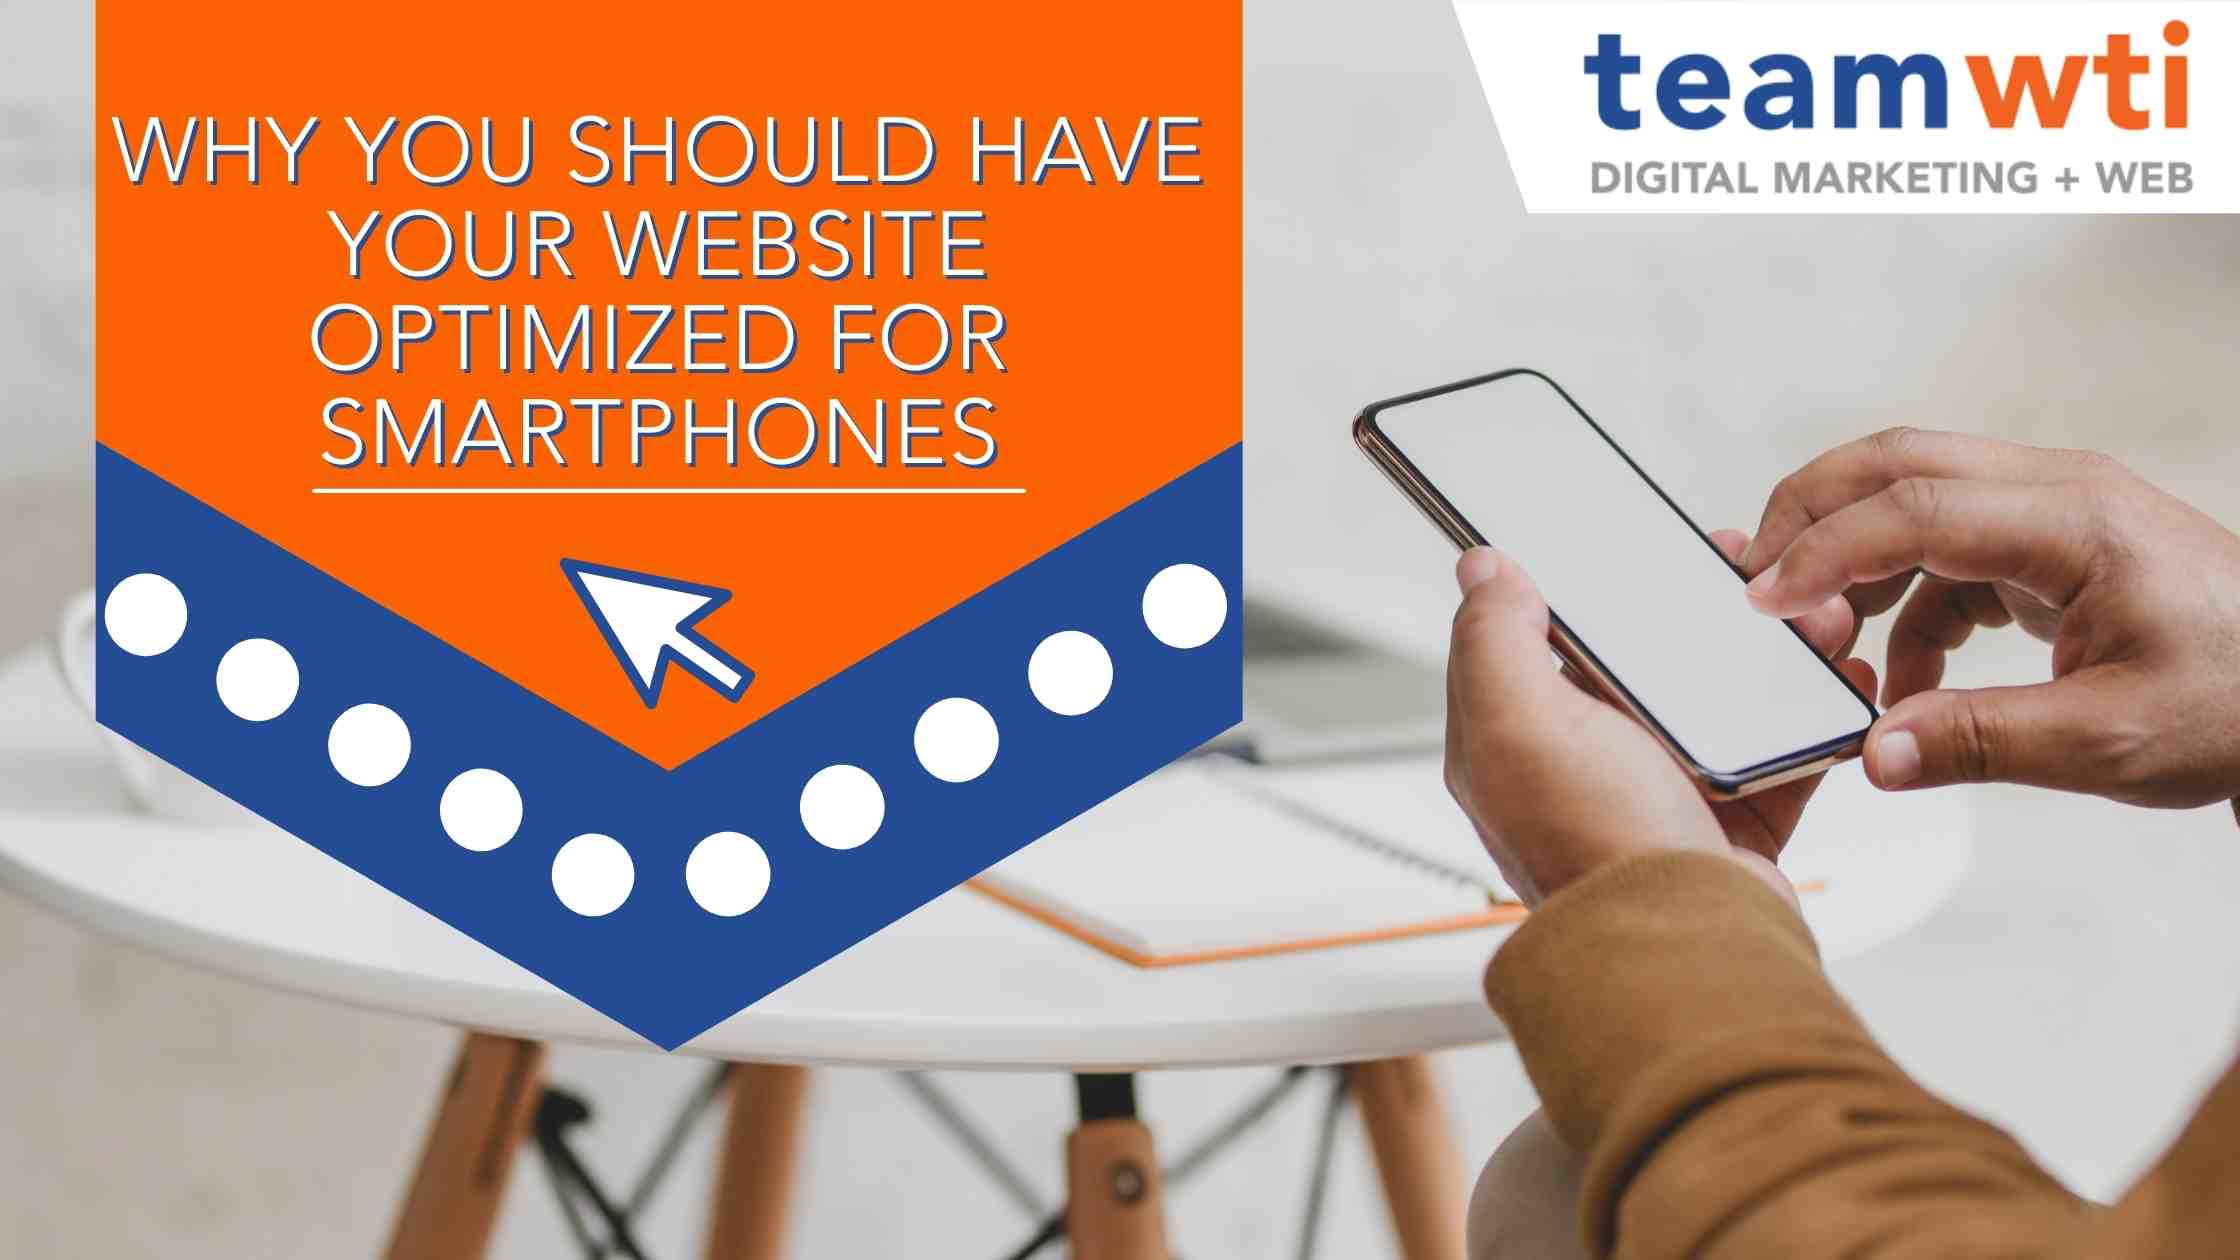 Why You Should Have Your Website Optimized For Smartphones